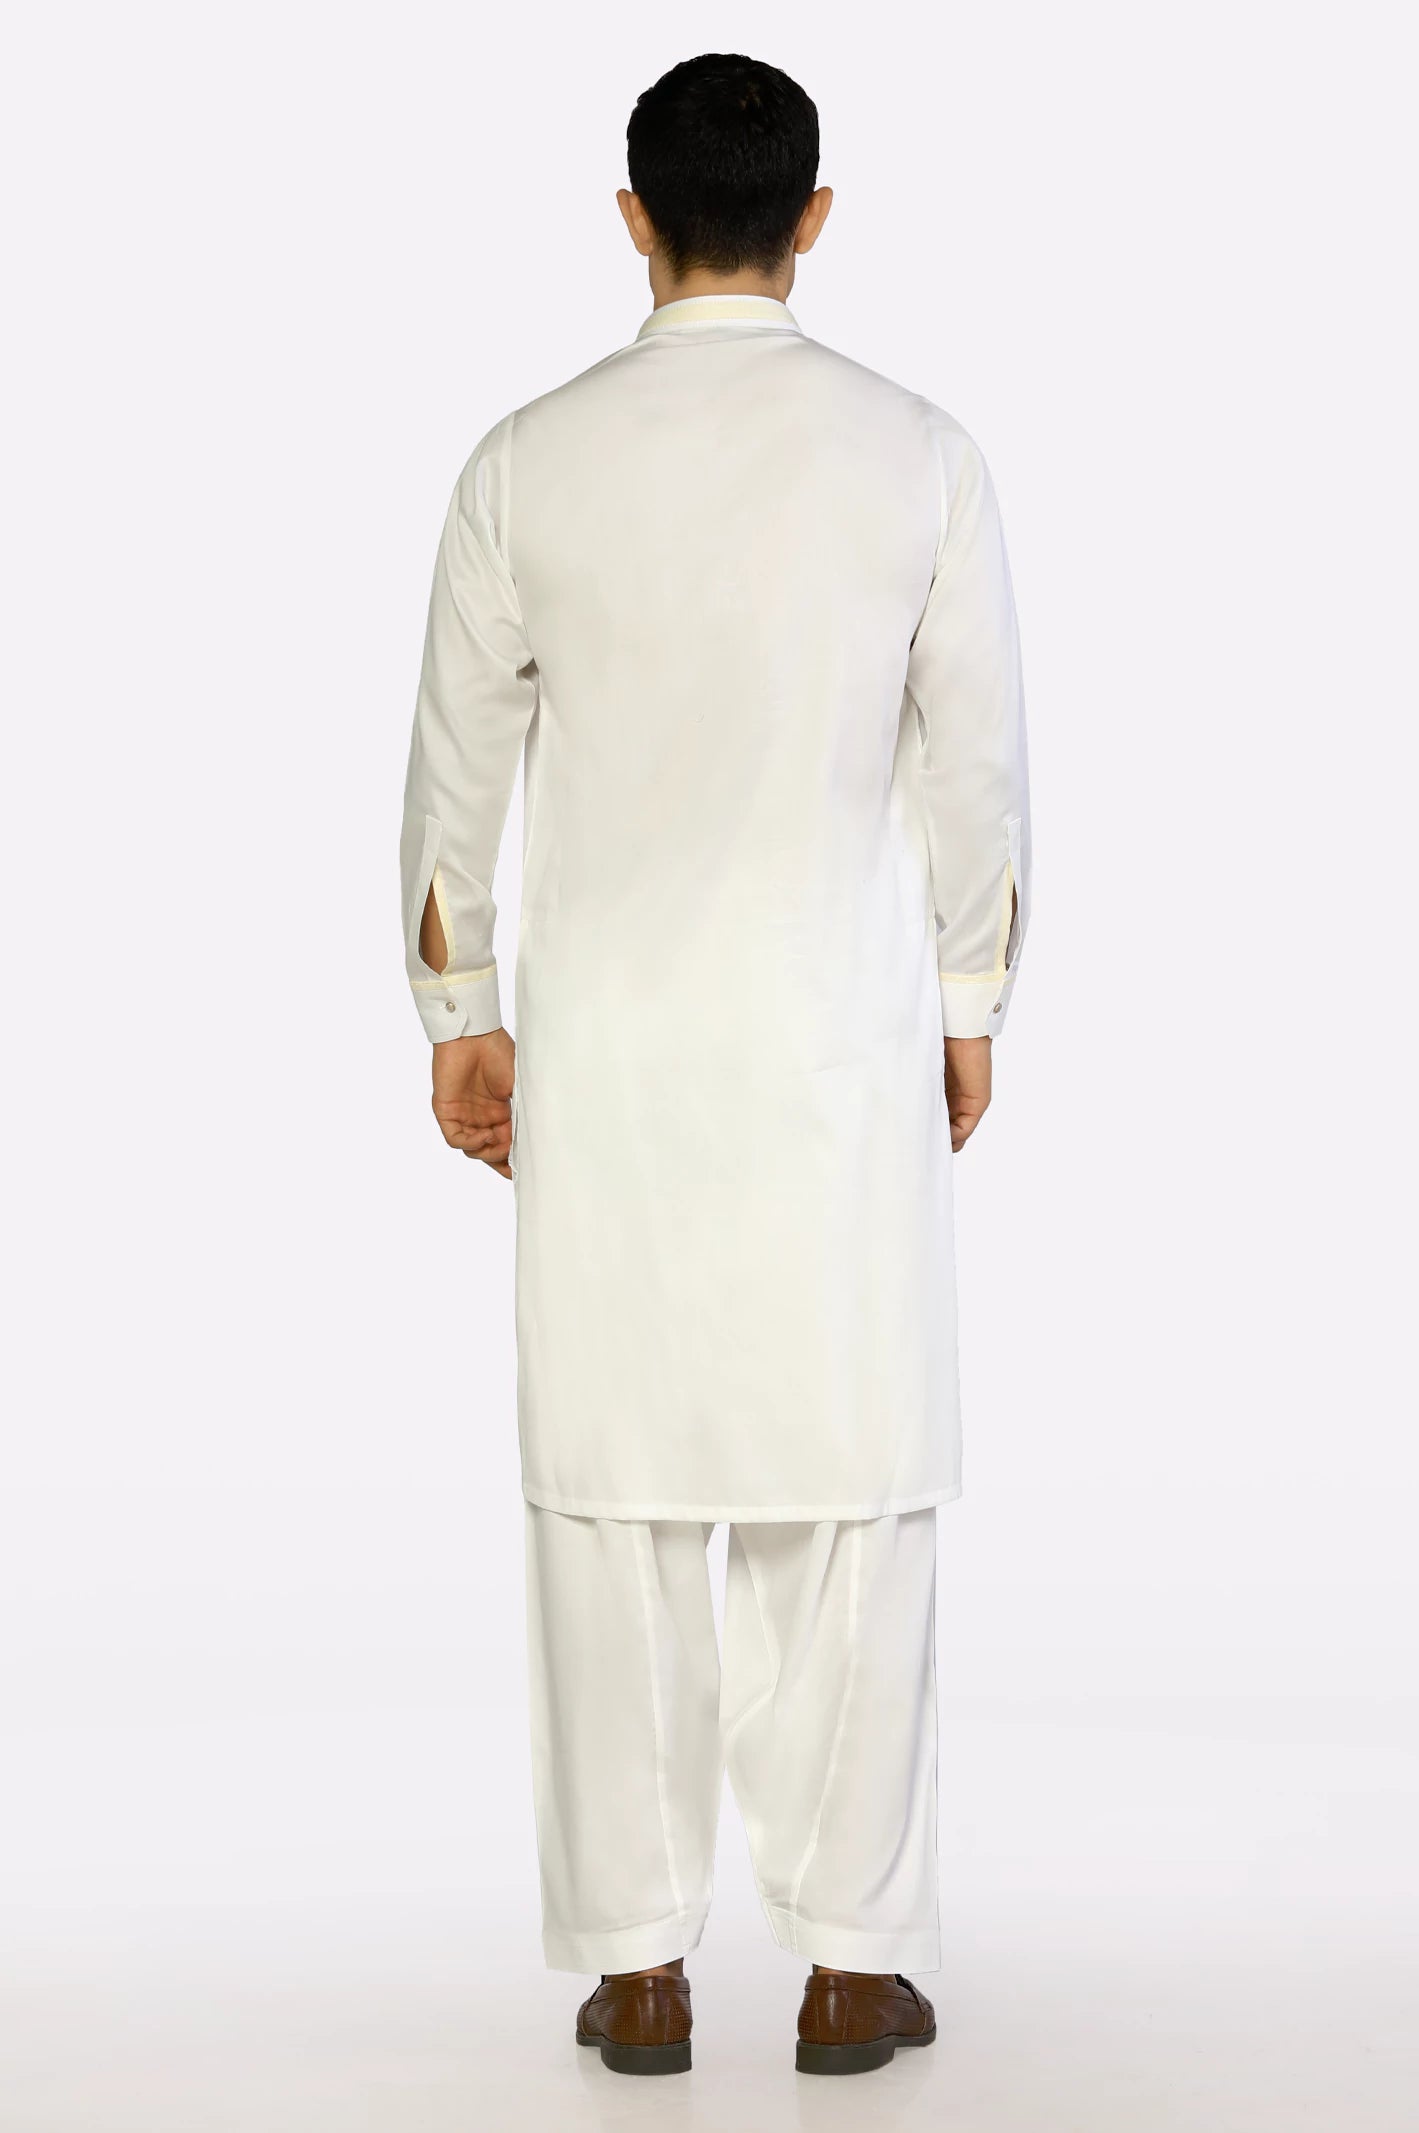 Off White Cotton Shalwar Kameez for Men from Diners